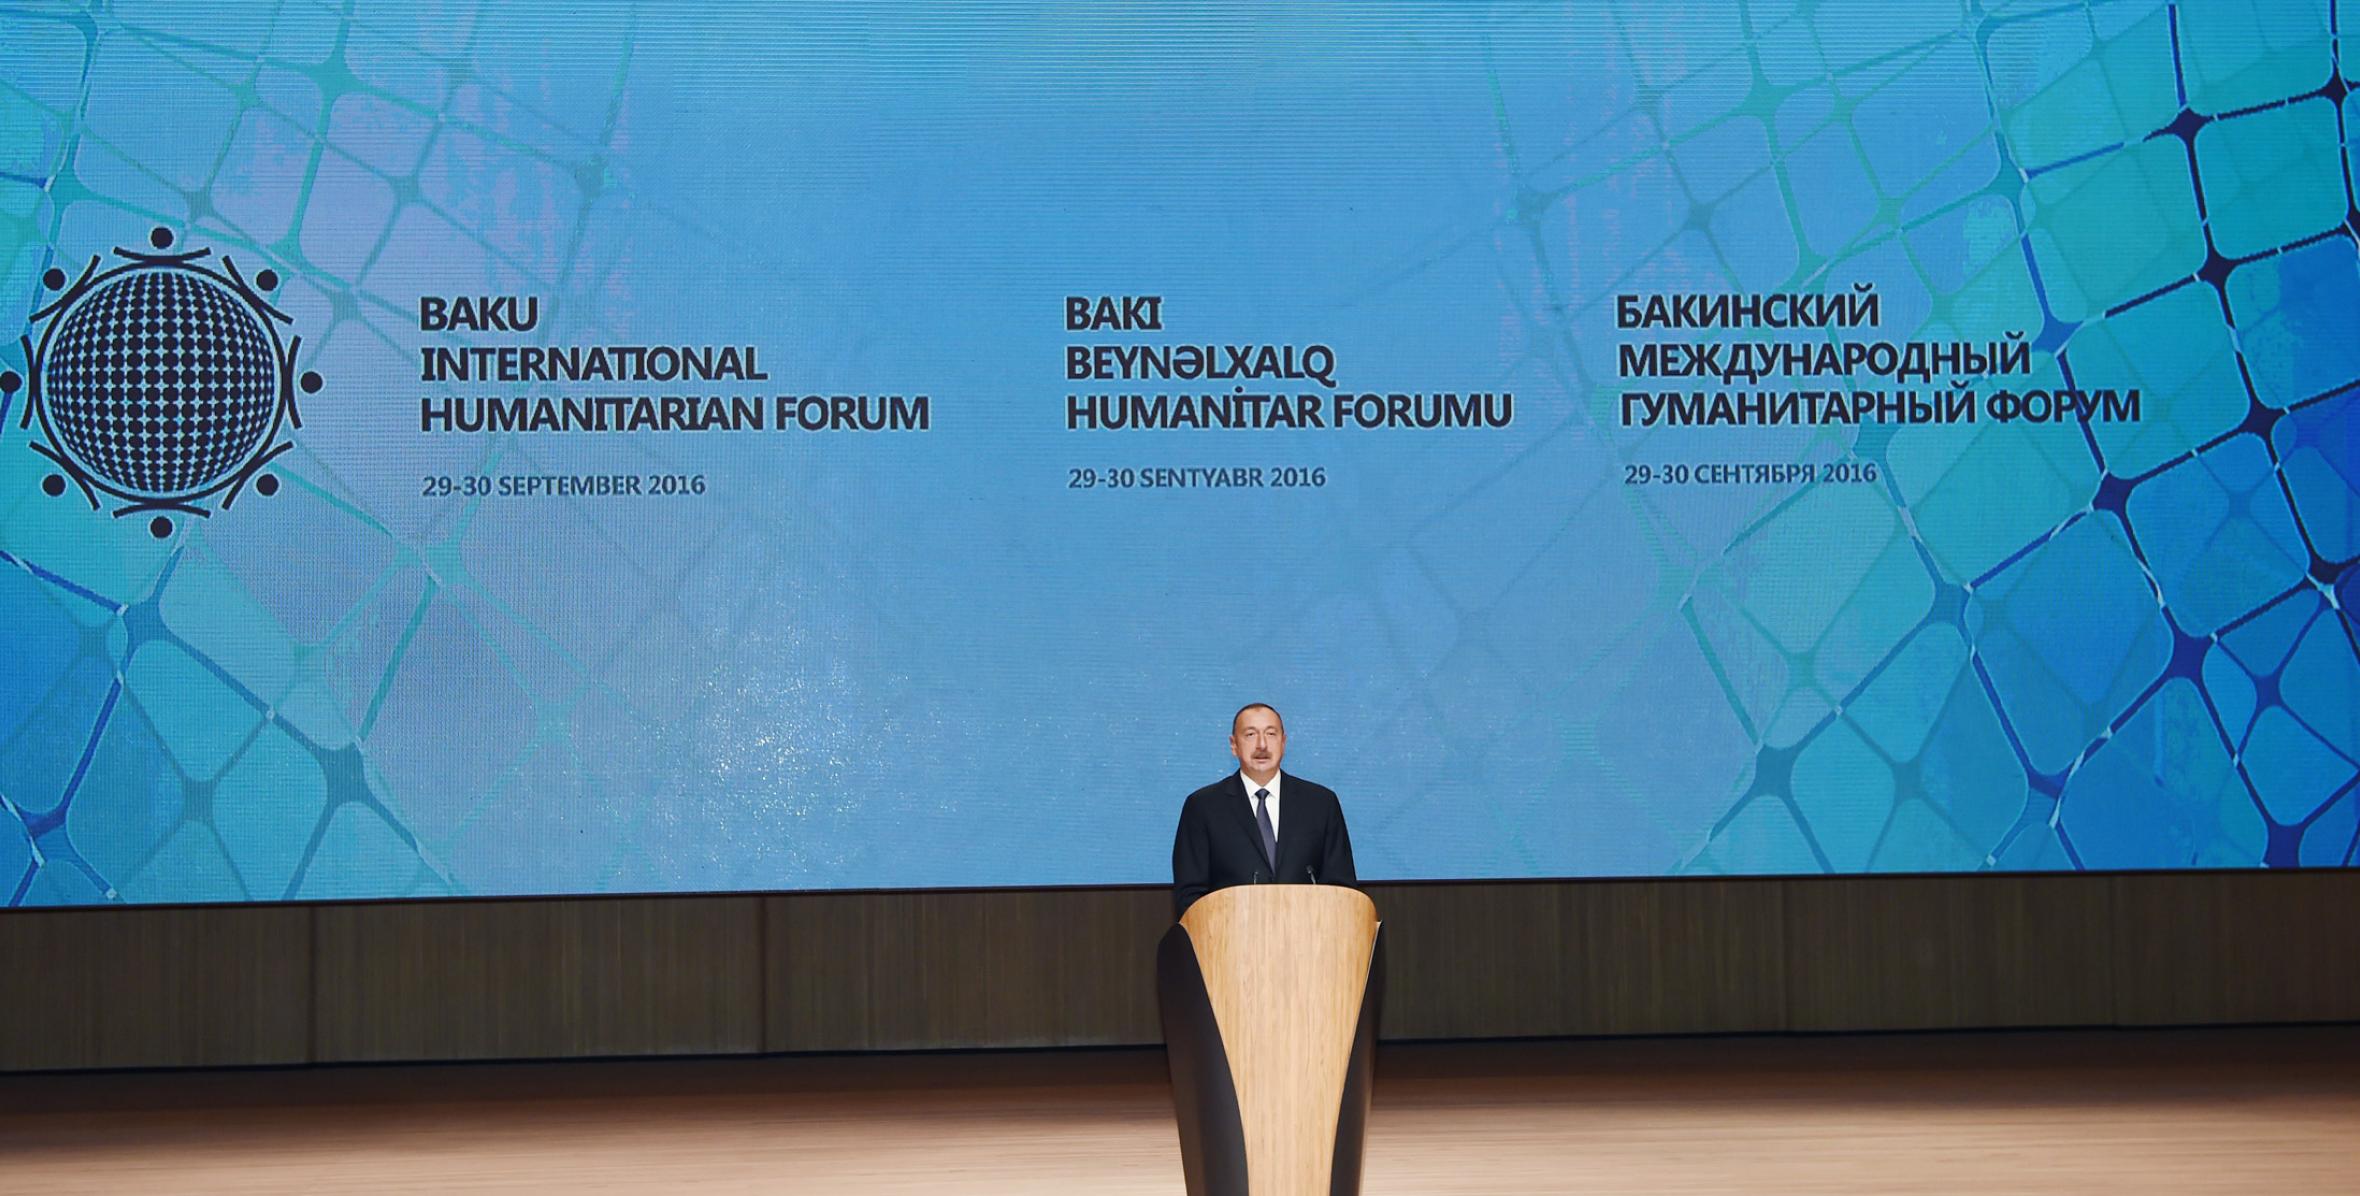 Ilham Aliyev attended the opening of the Fifth Baku International Humanitarian Forum